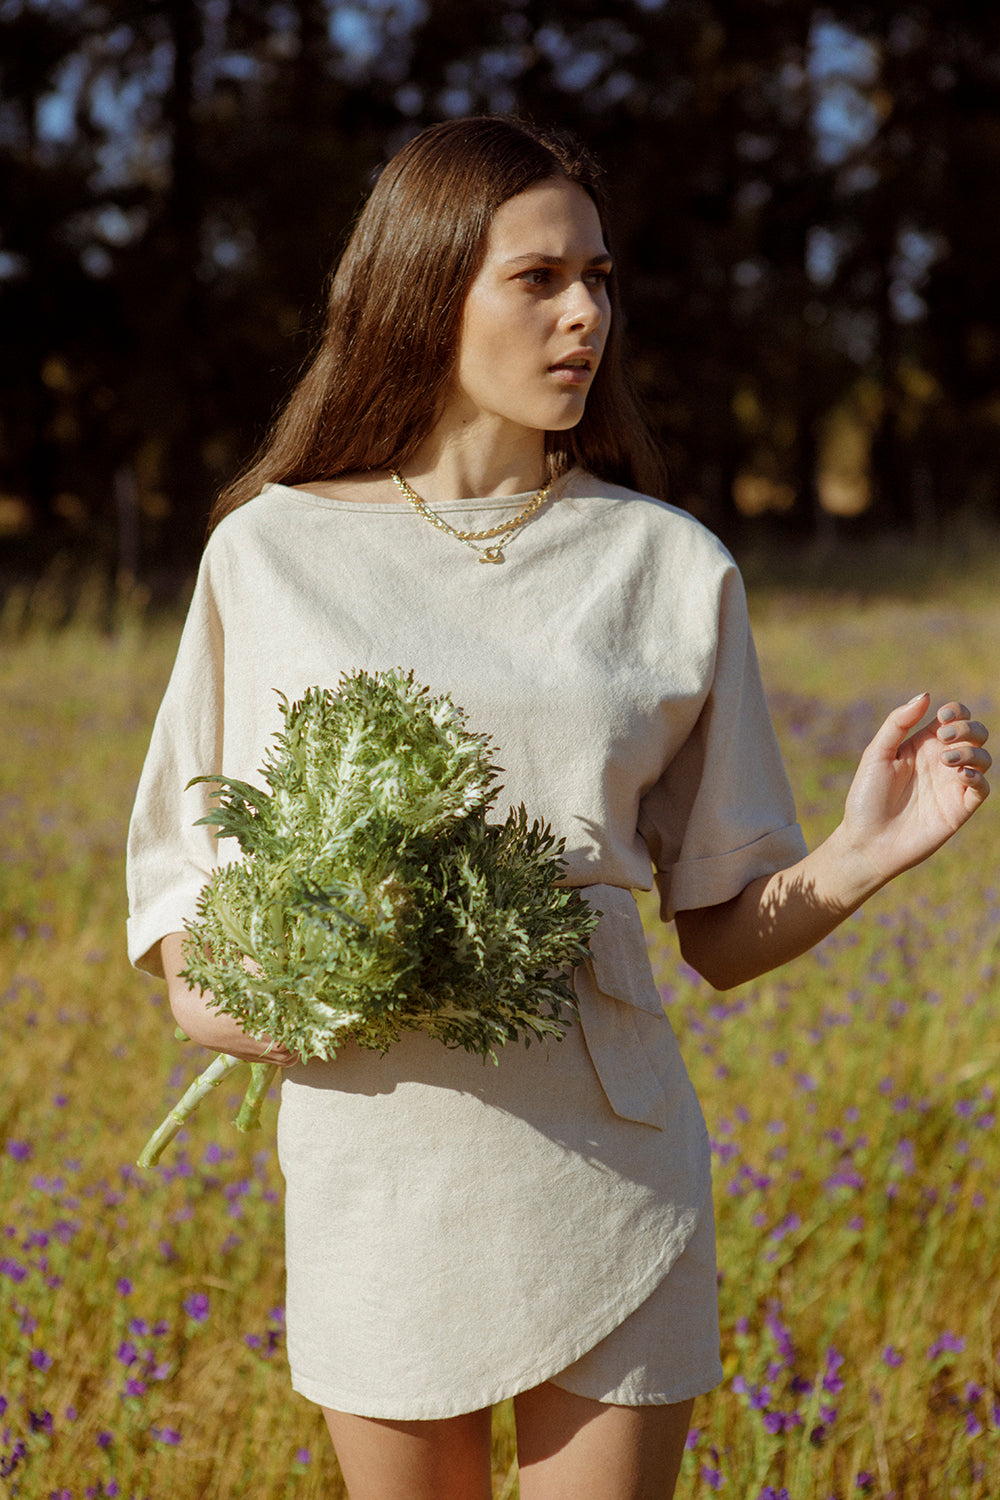 Model wearing the Nori Top while in a field